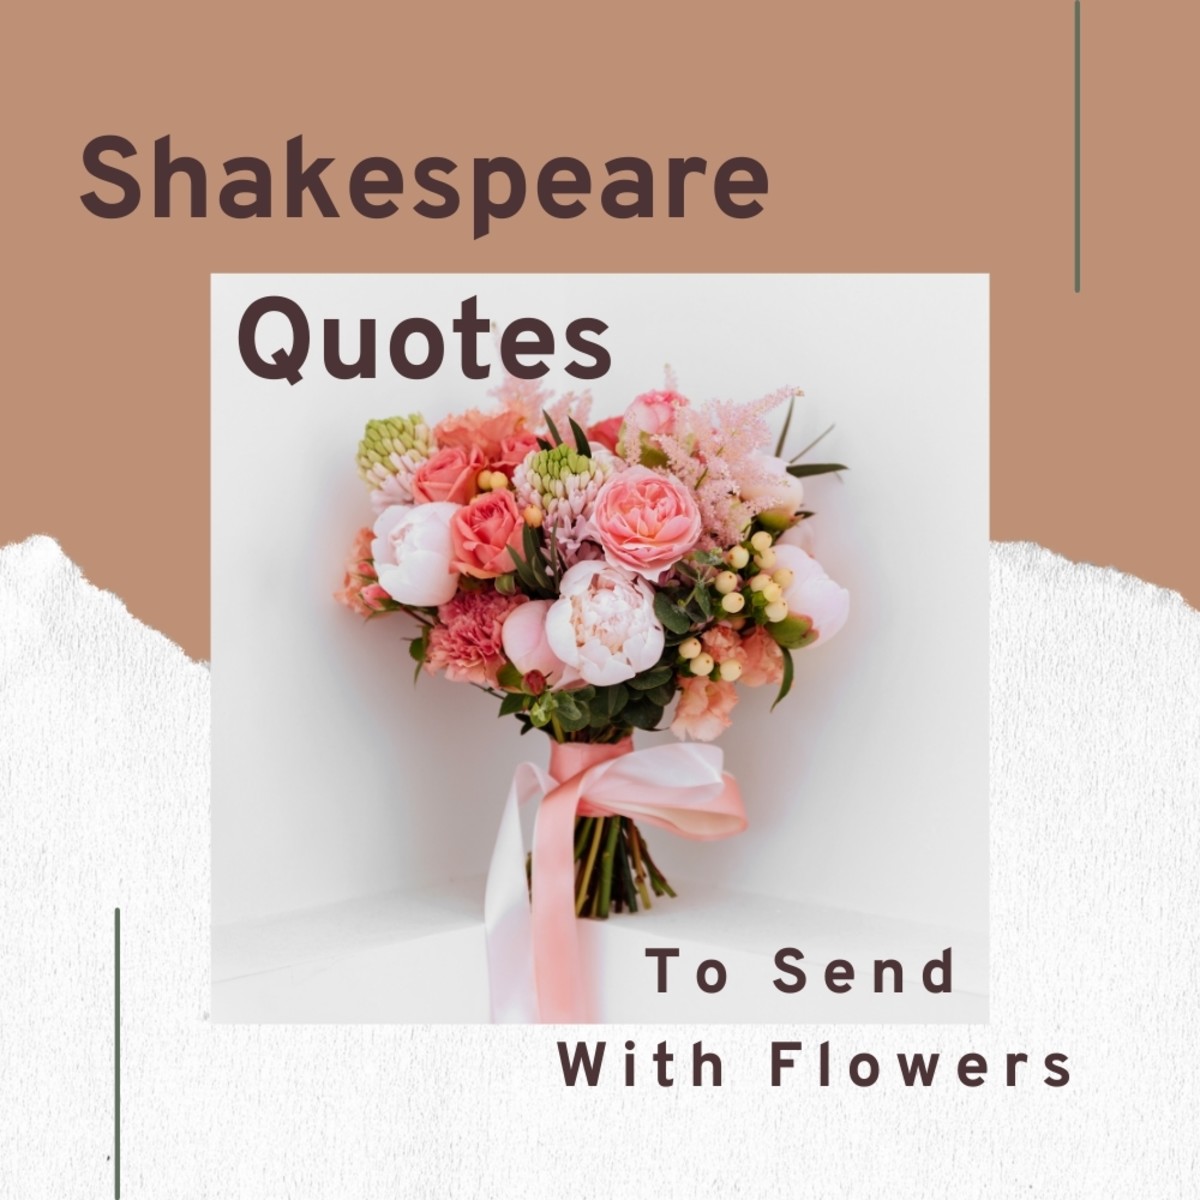 Shakespeare Quotes for Flowers and Bouquet Cards